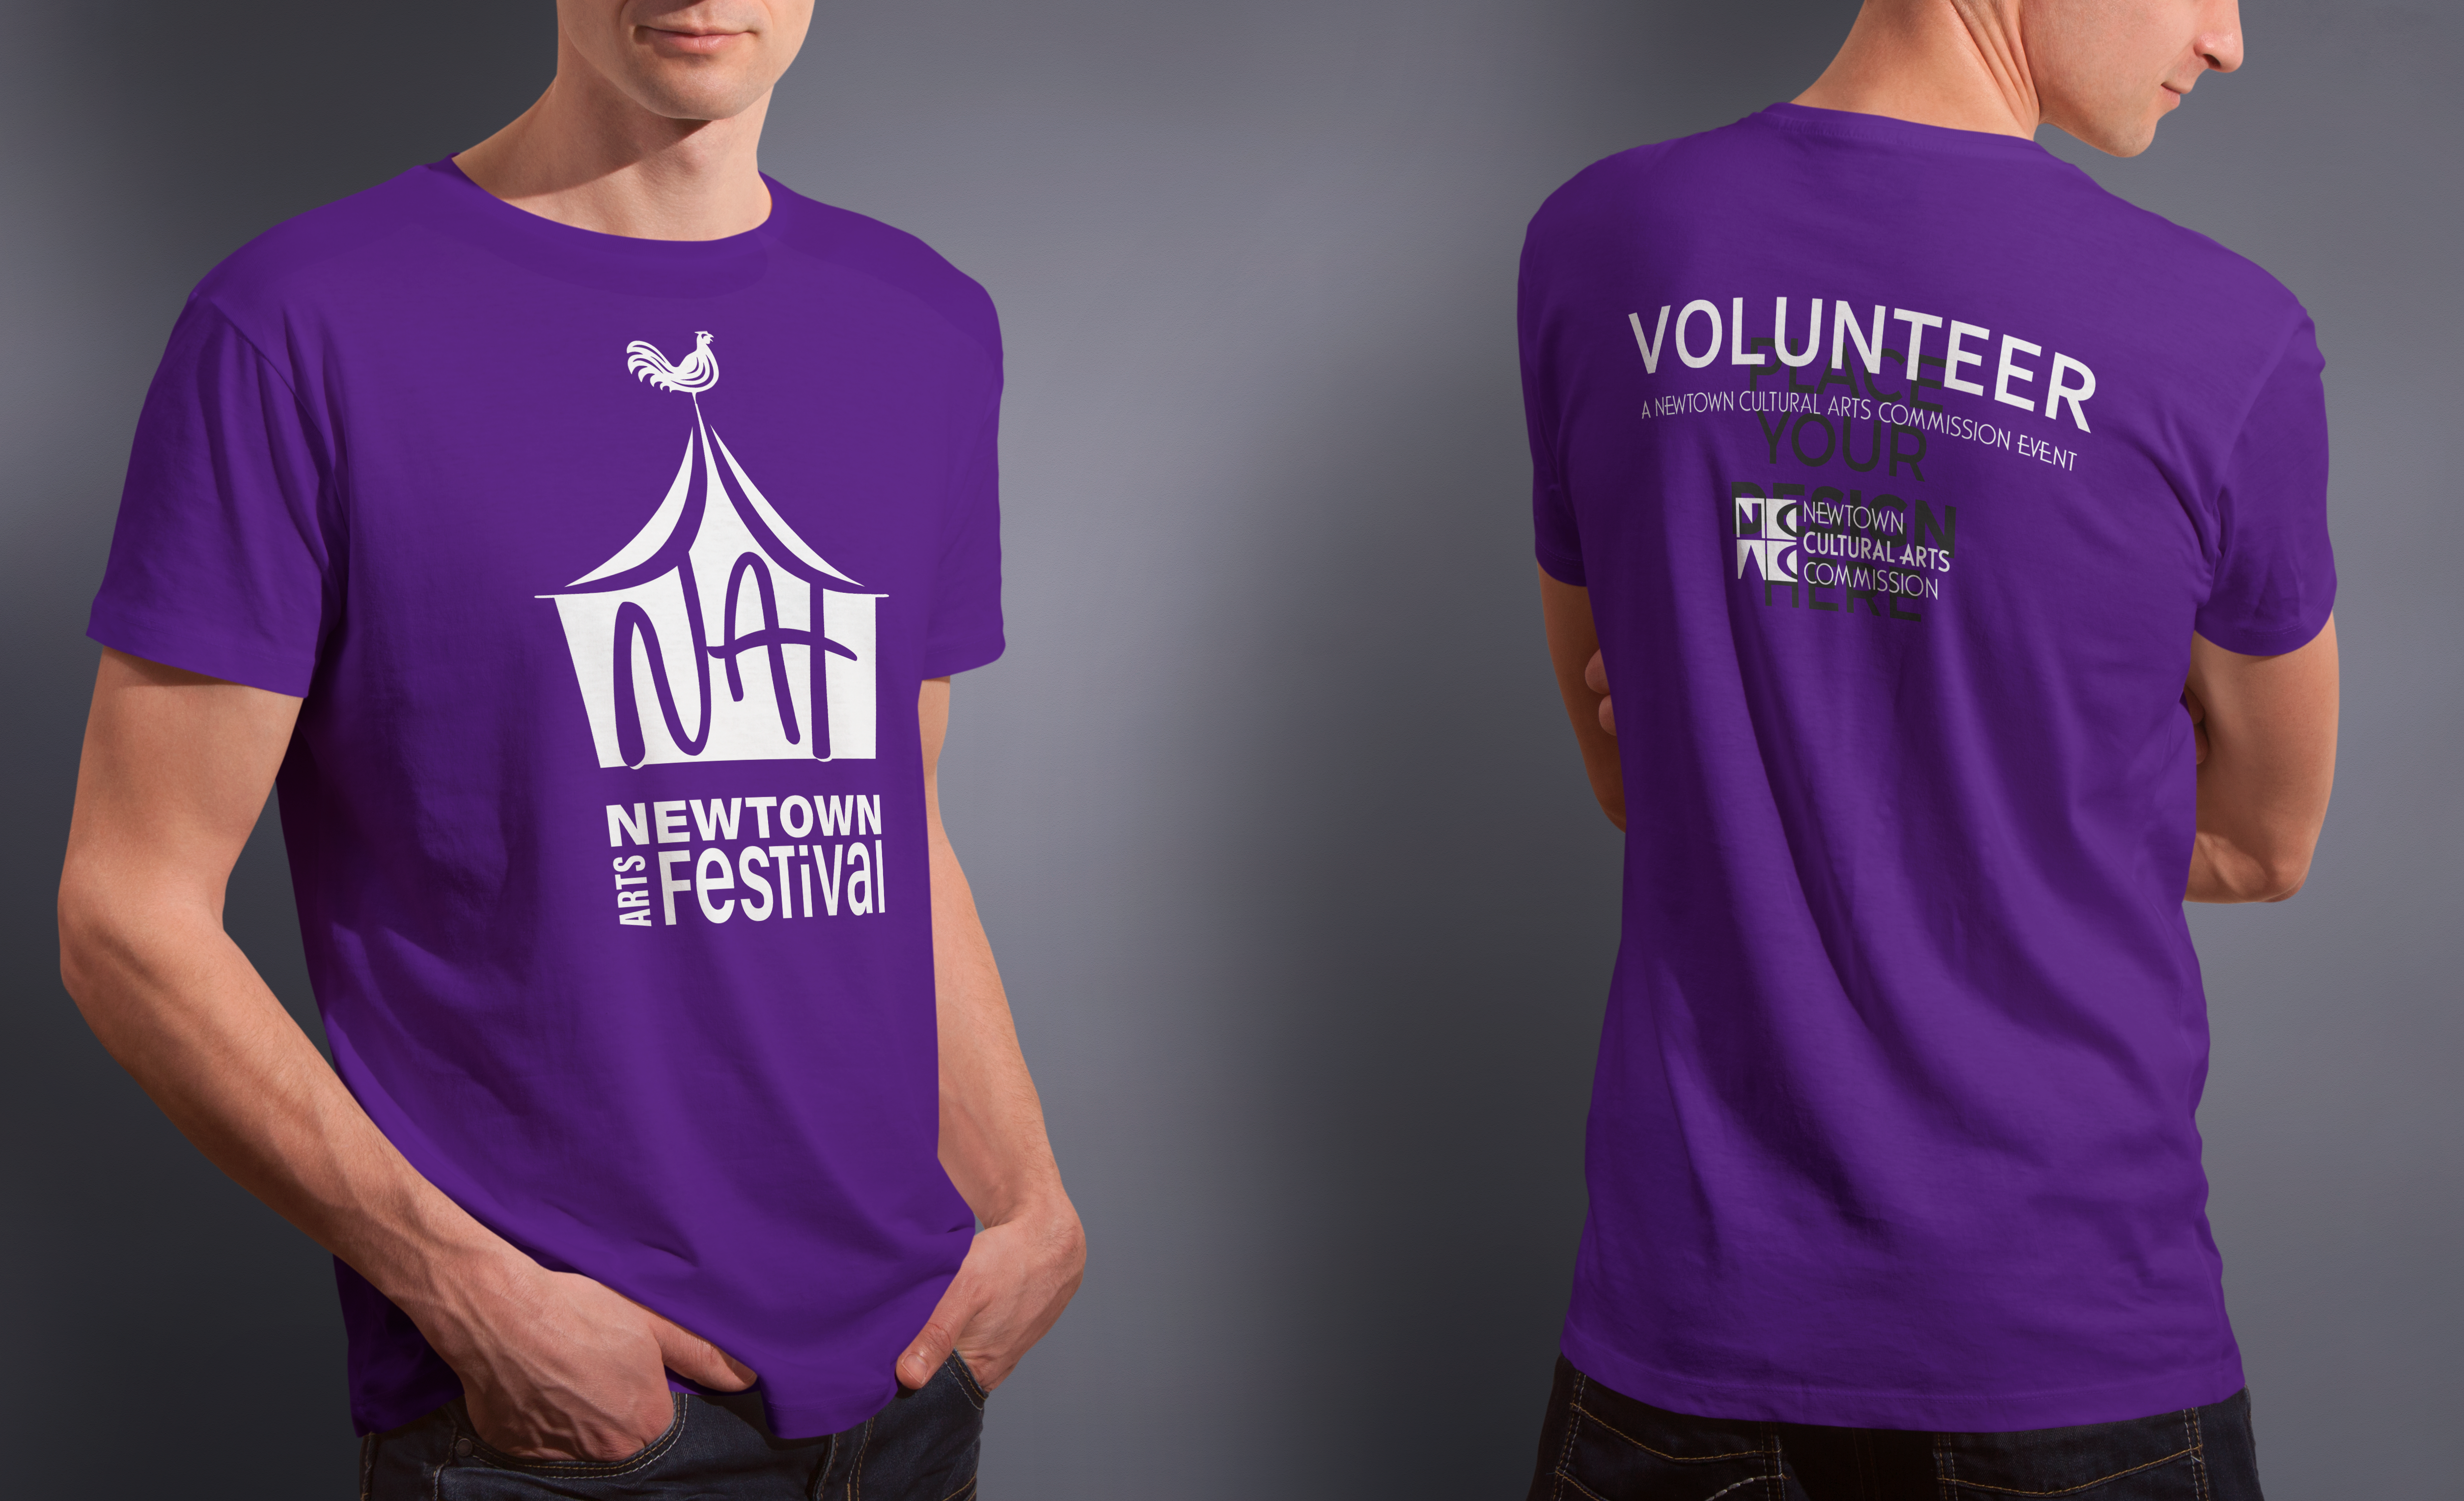 get a free t-shirt when you volunteer